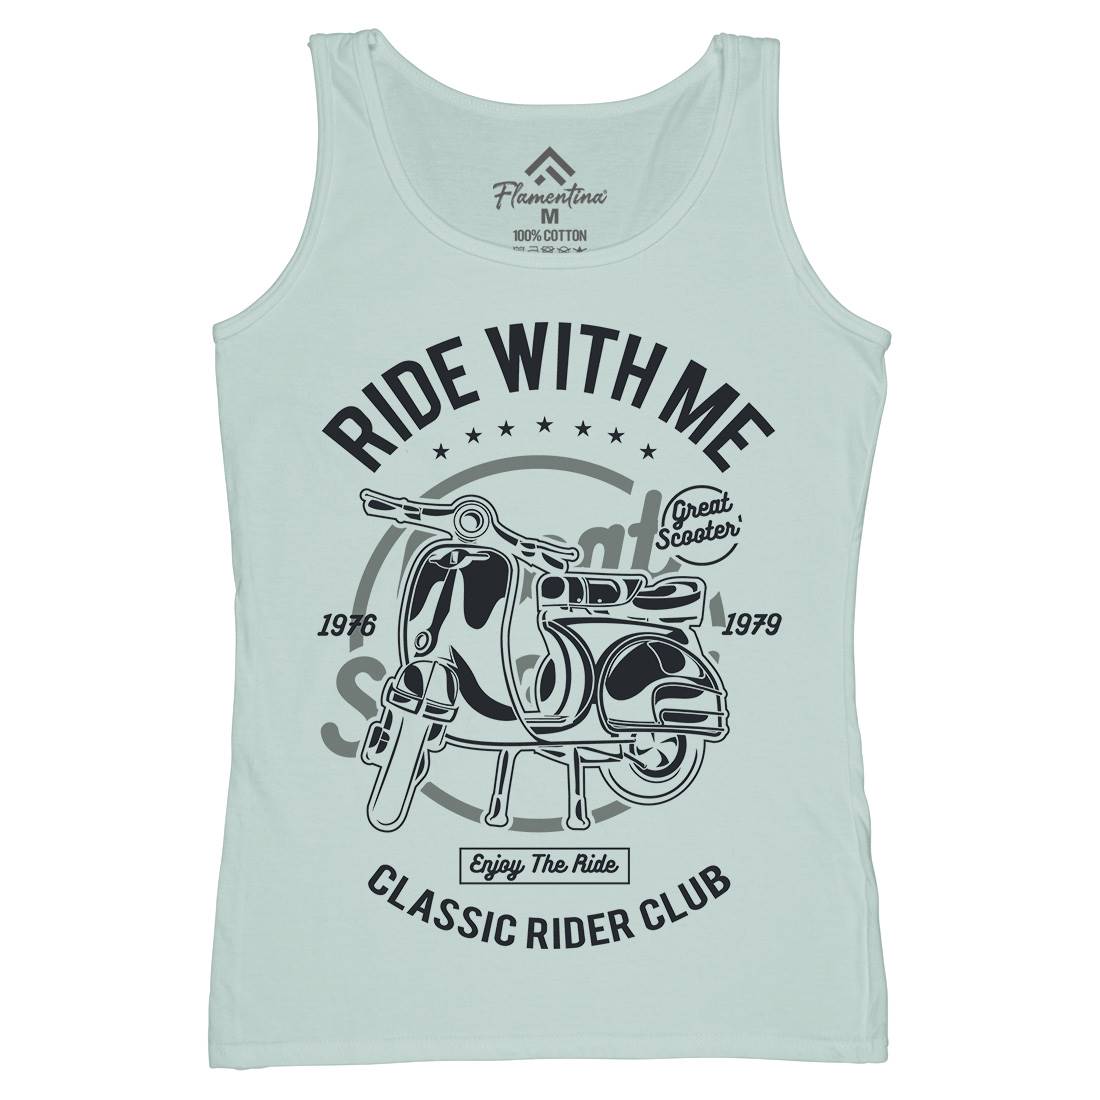 Ride With Me Womens Organic Tank Top Vest Motorcycles A120